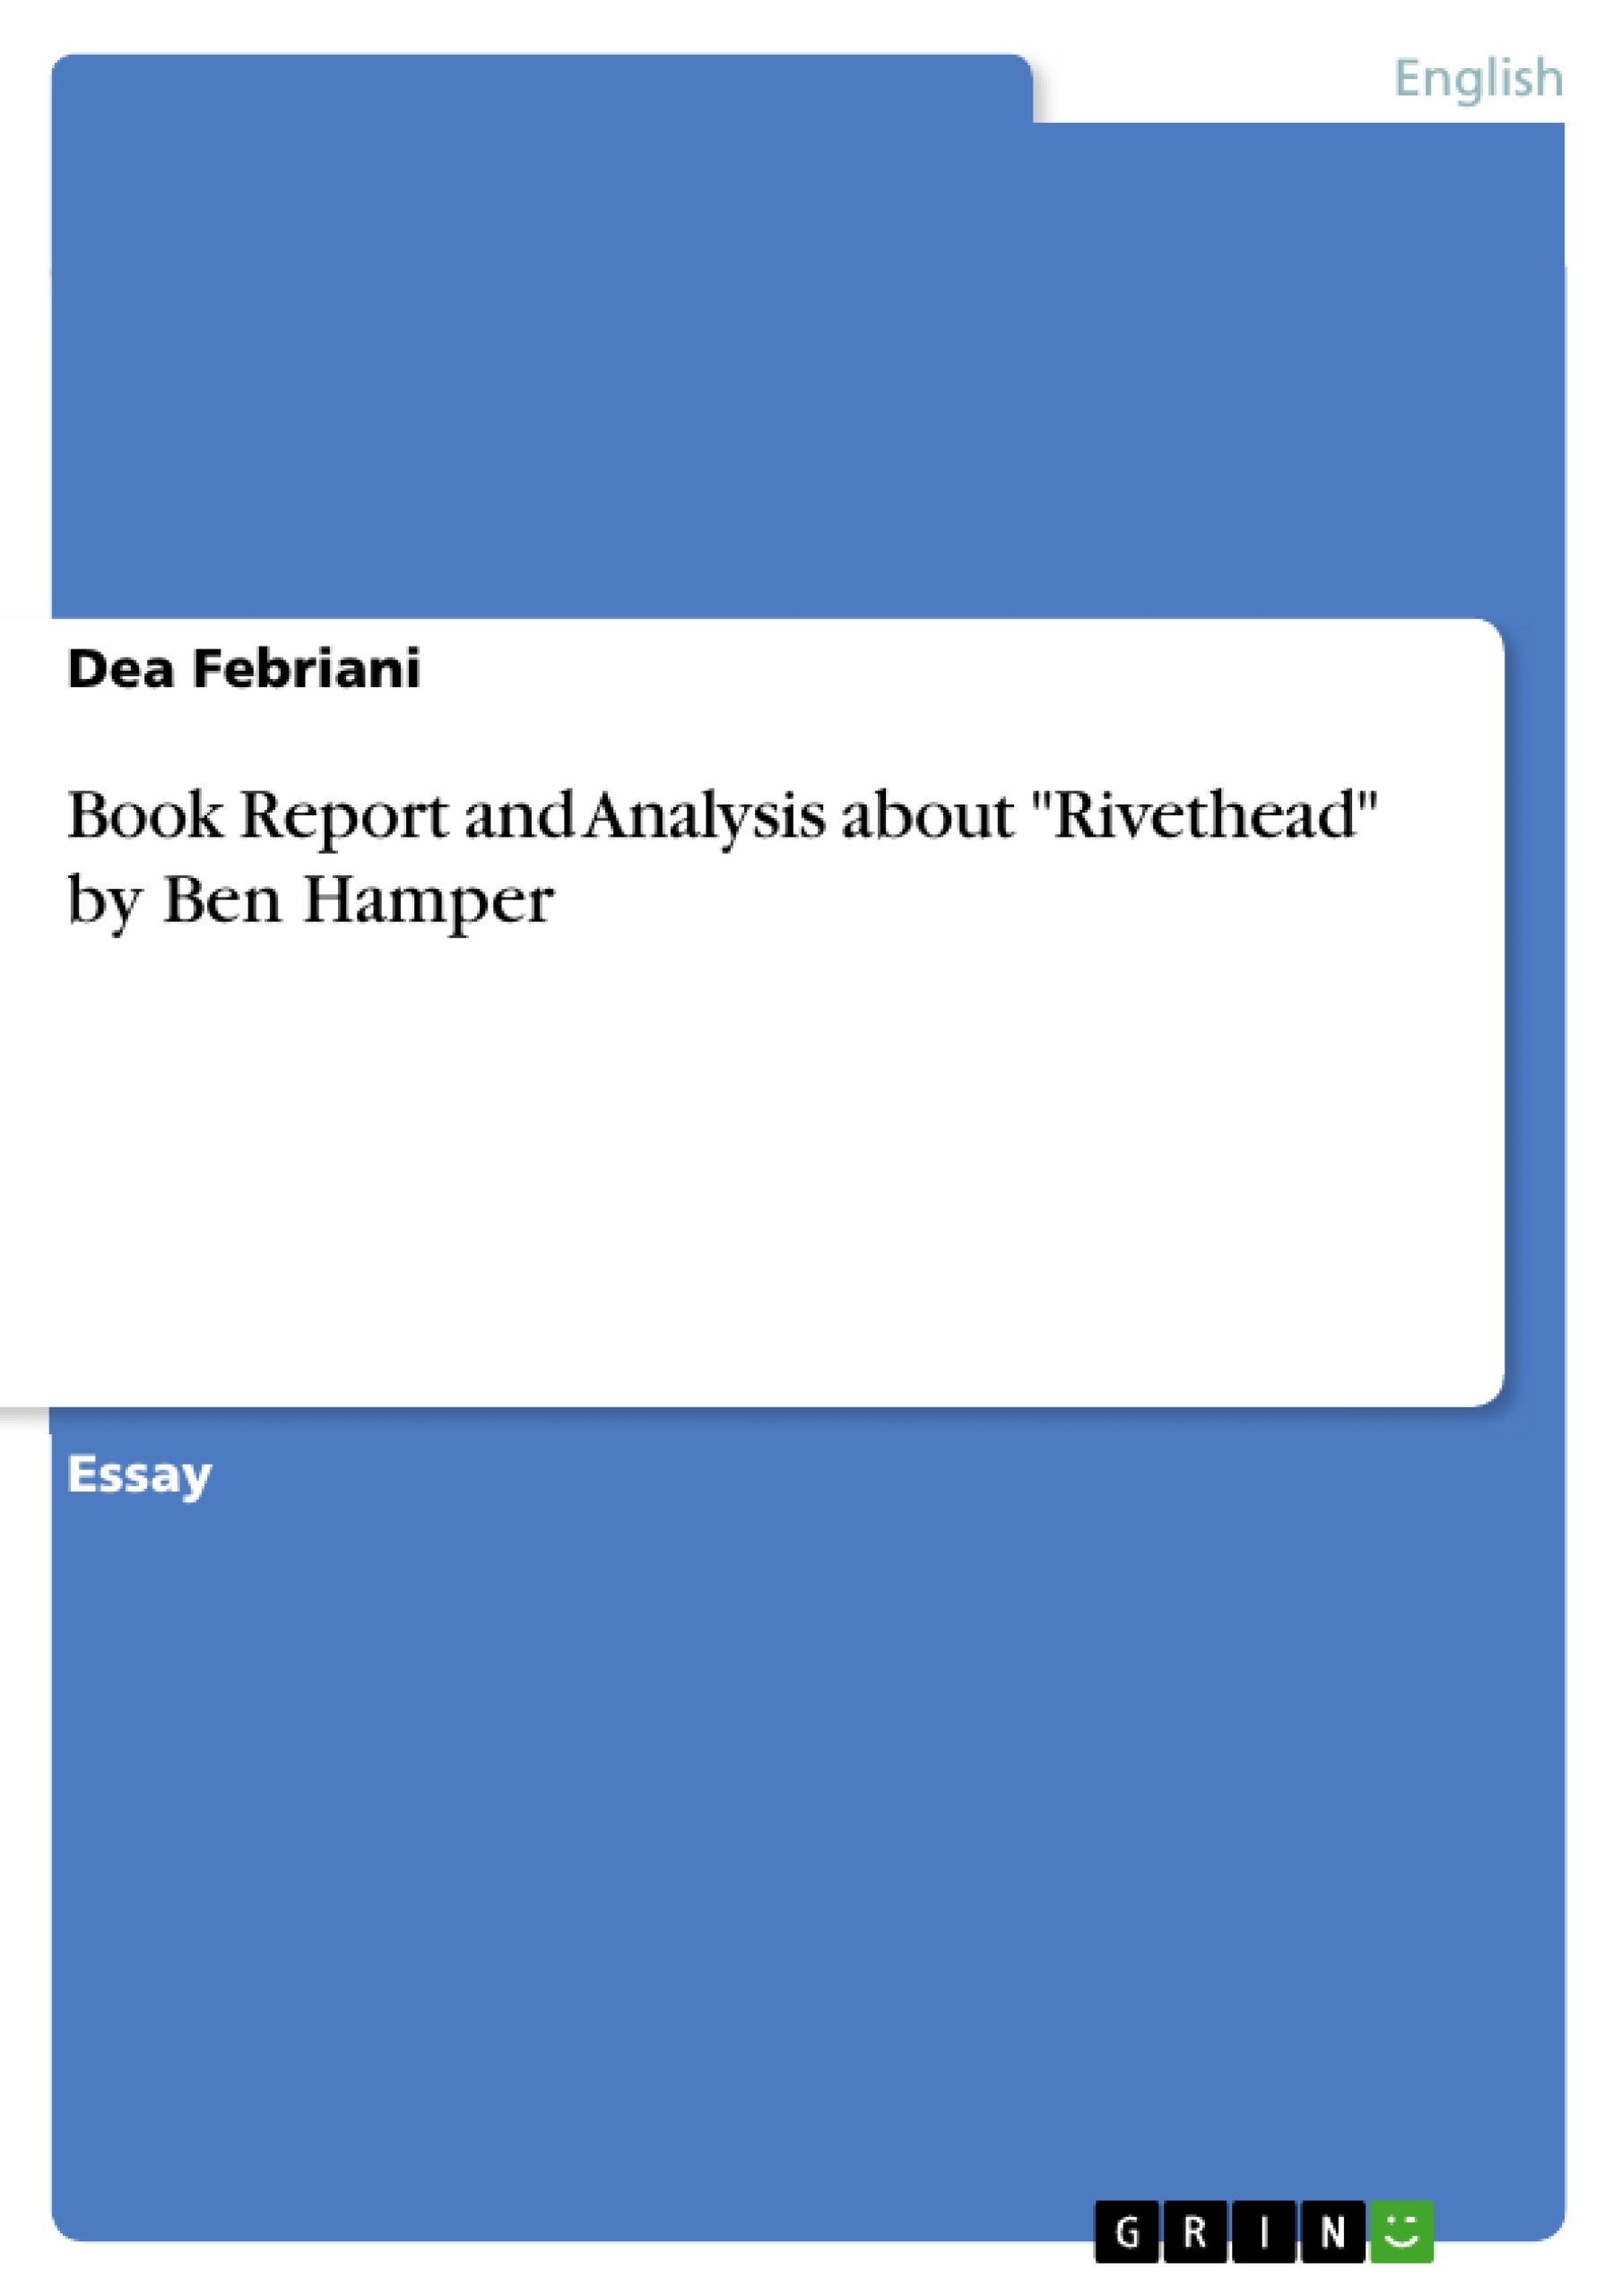 Titre: Book Report and Analysis about "Rivethead" by Ben Hamper